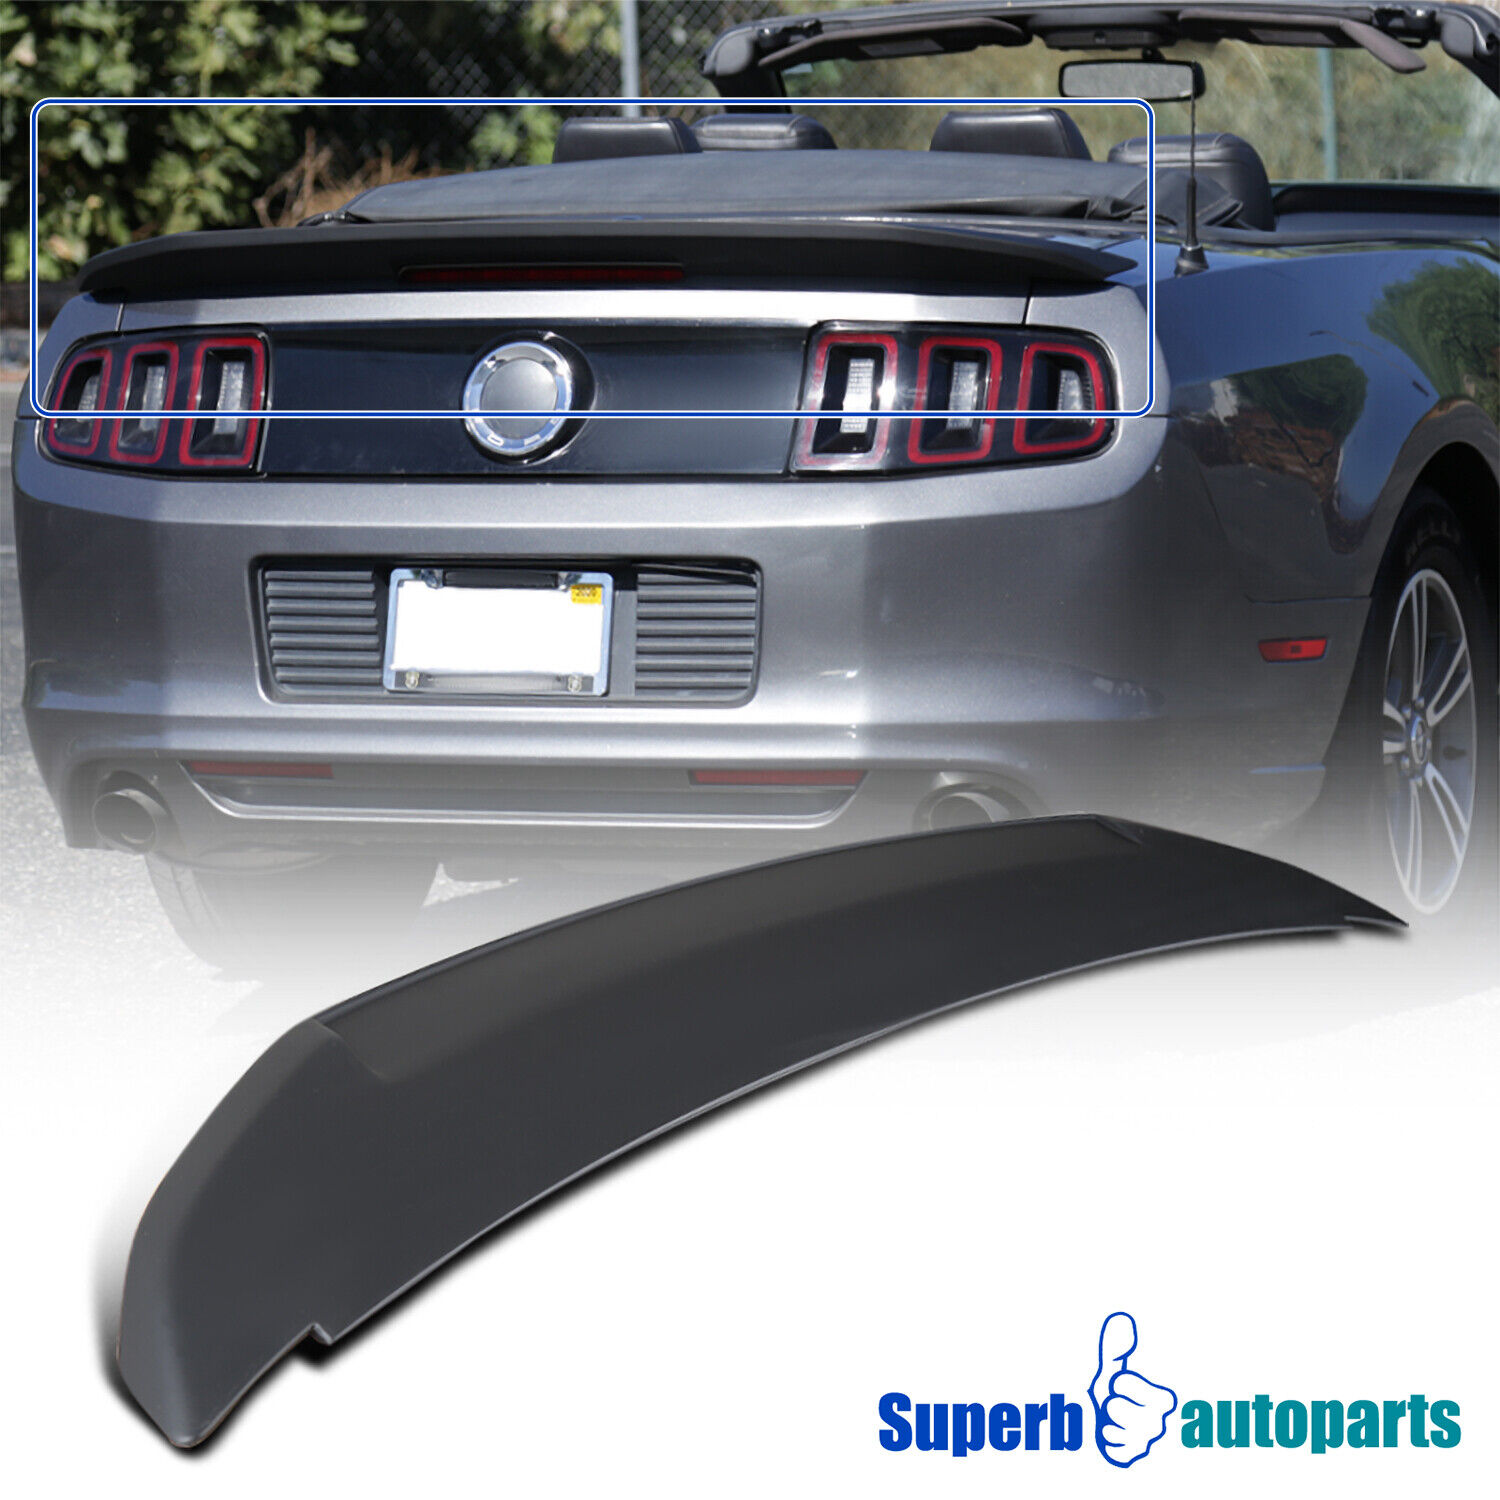 Fits 2010-2014 Ford Mustang Shelby GT500 Factory Style Rear Trunk Spoiler Wing